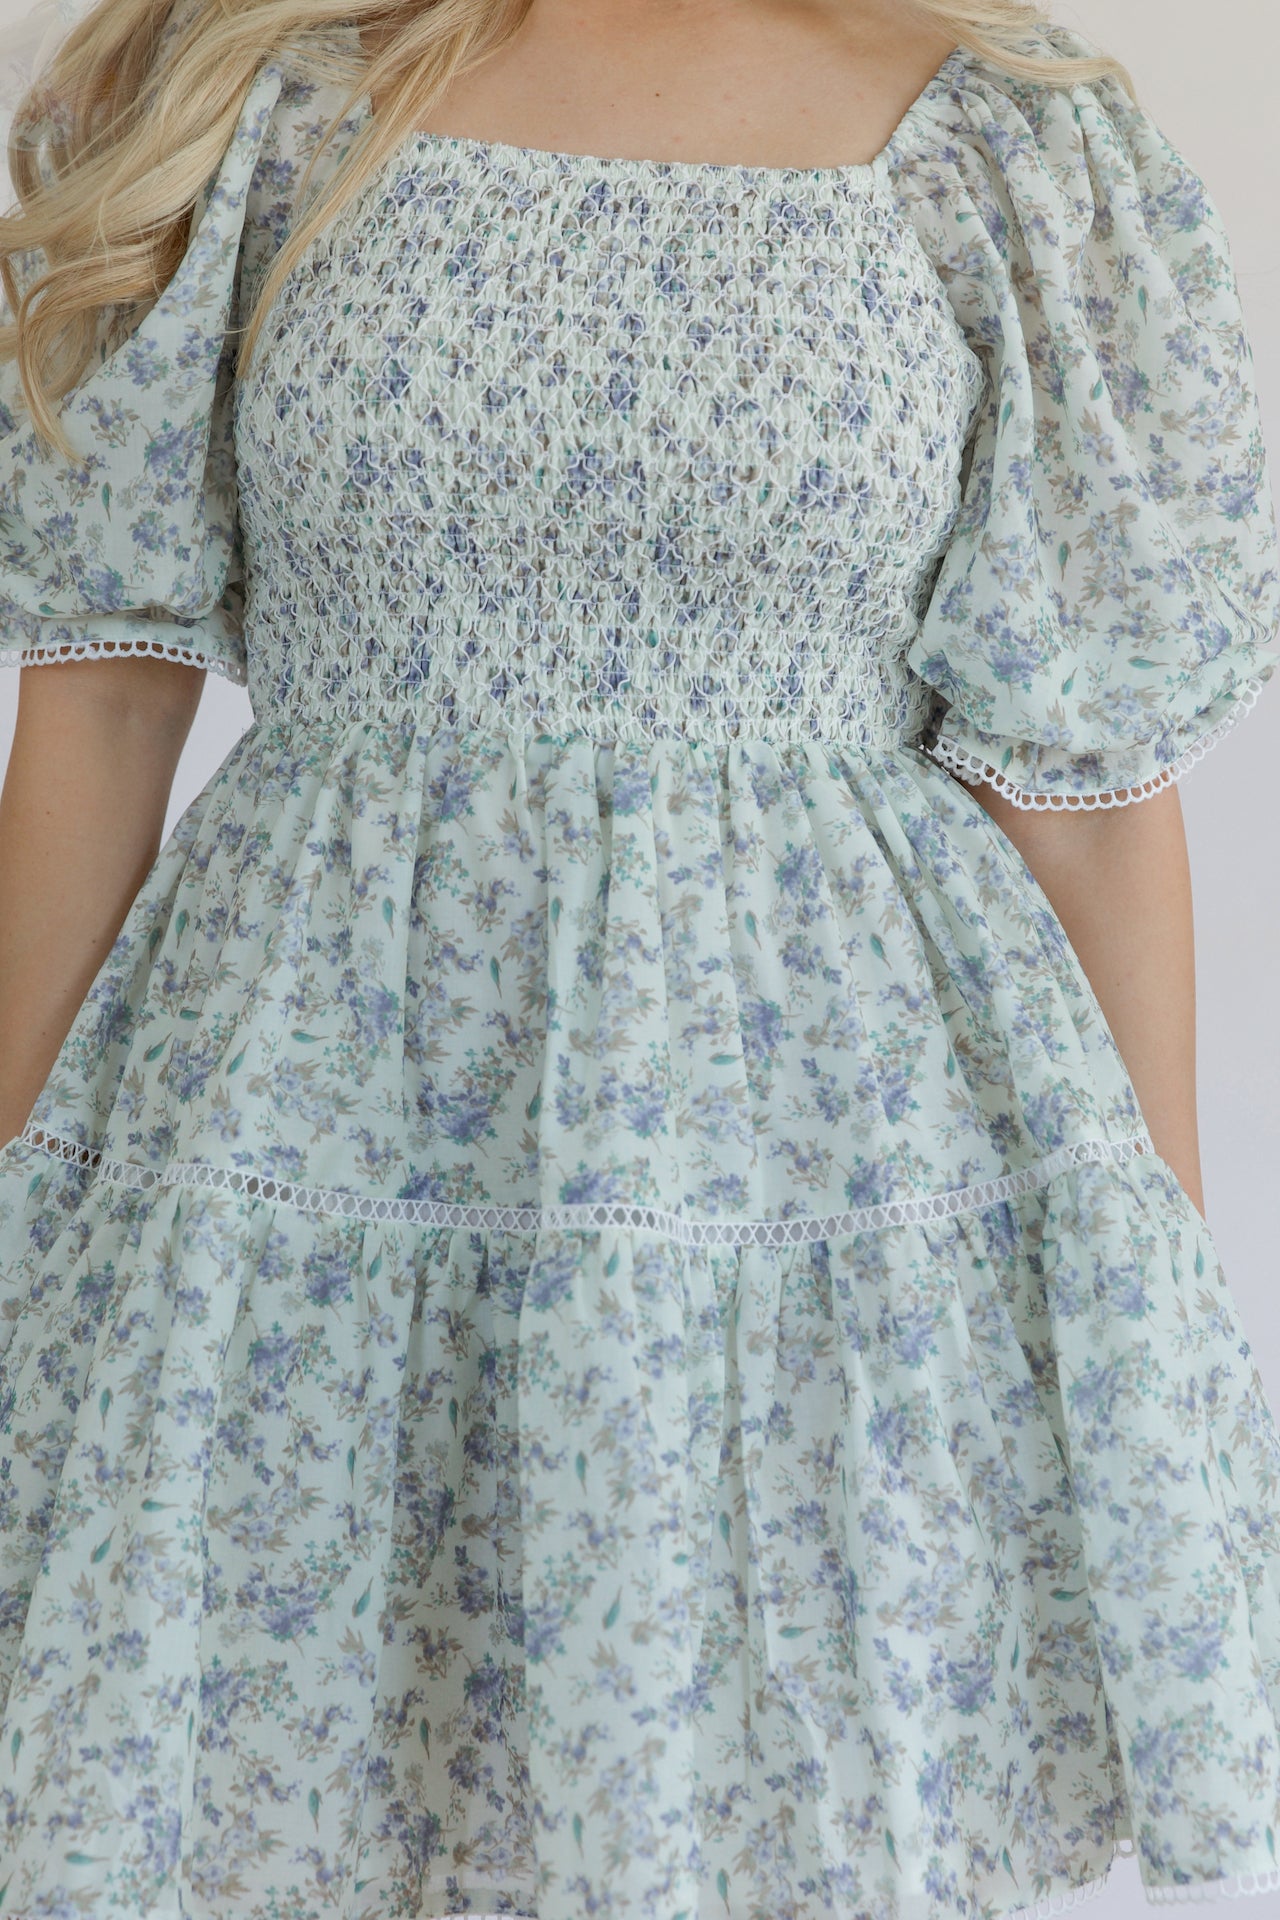 blue floral mini dress with puff sleeves, smocked bodice, tiered, and crochet lace trim